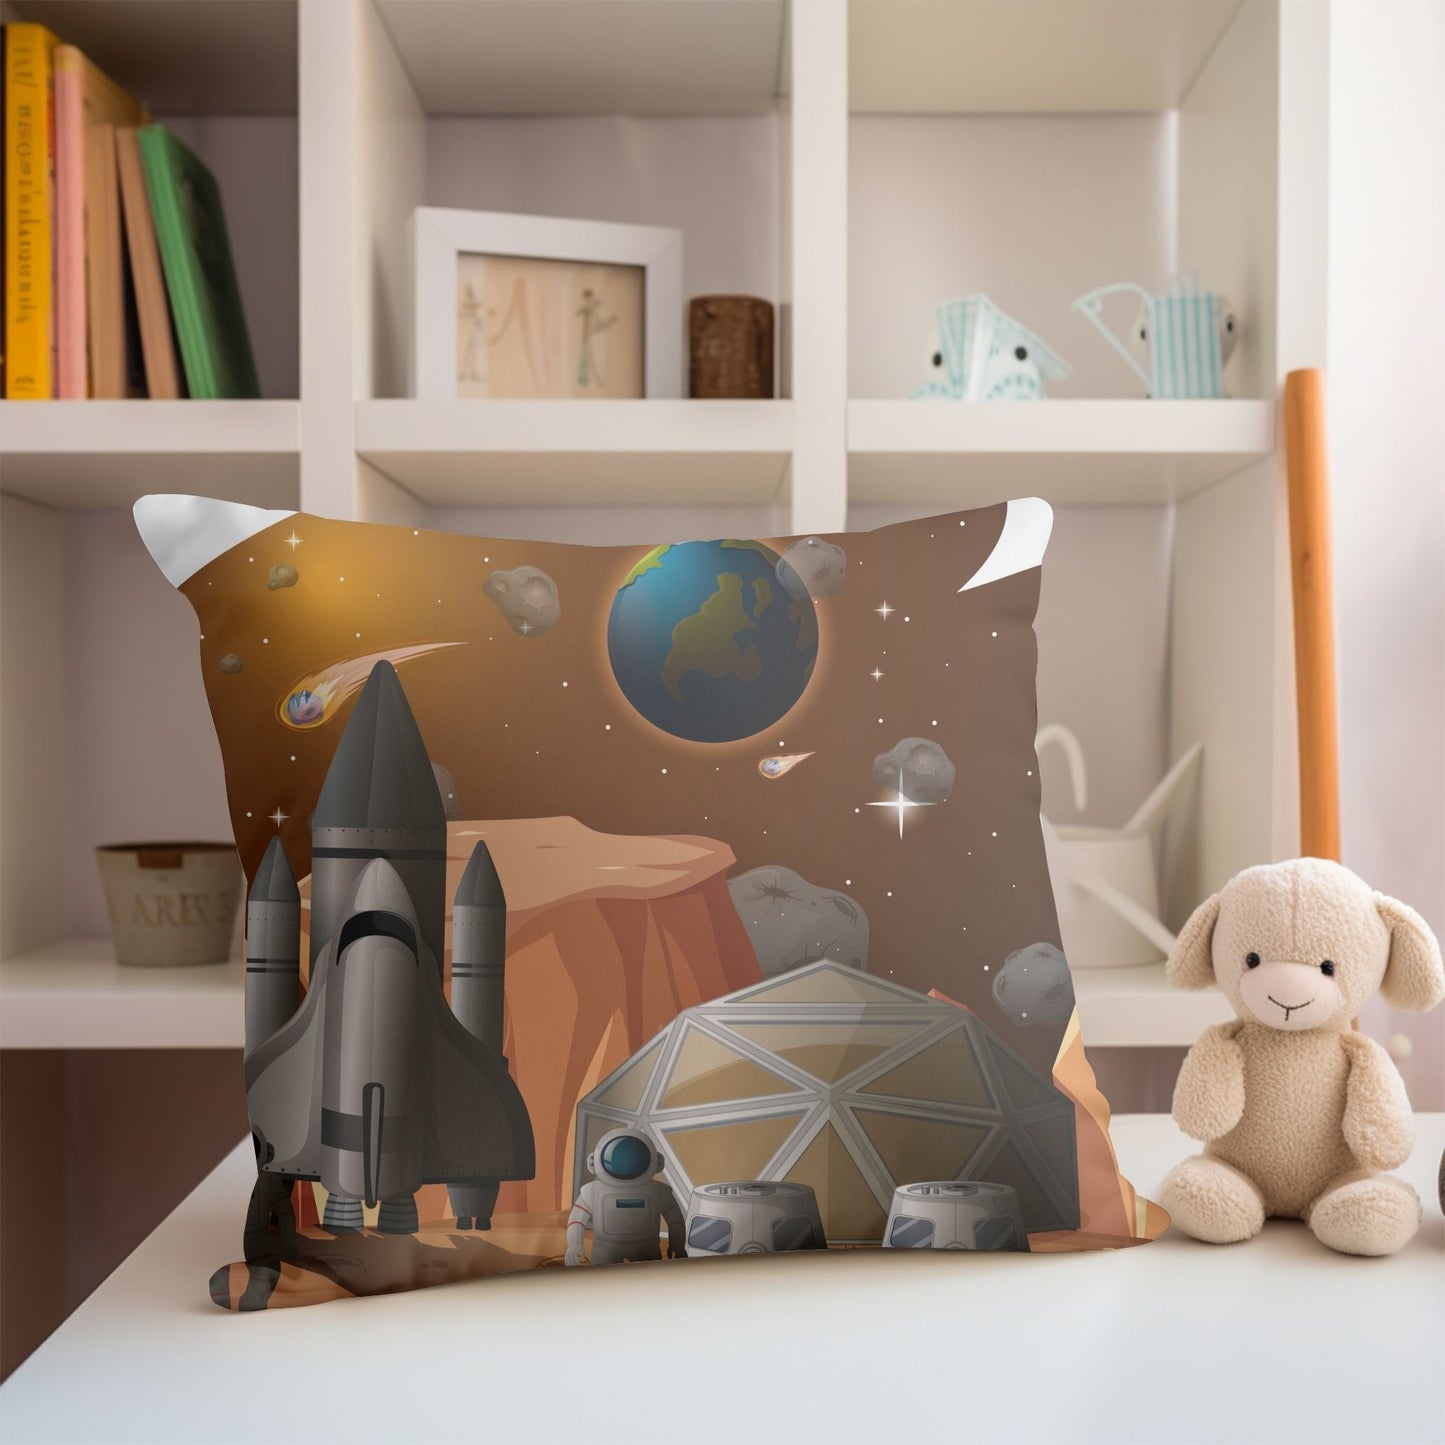 Kids pillow with an astronaut spacecraft pattern for space-themed rooms.